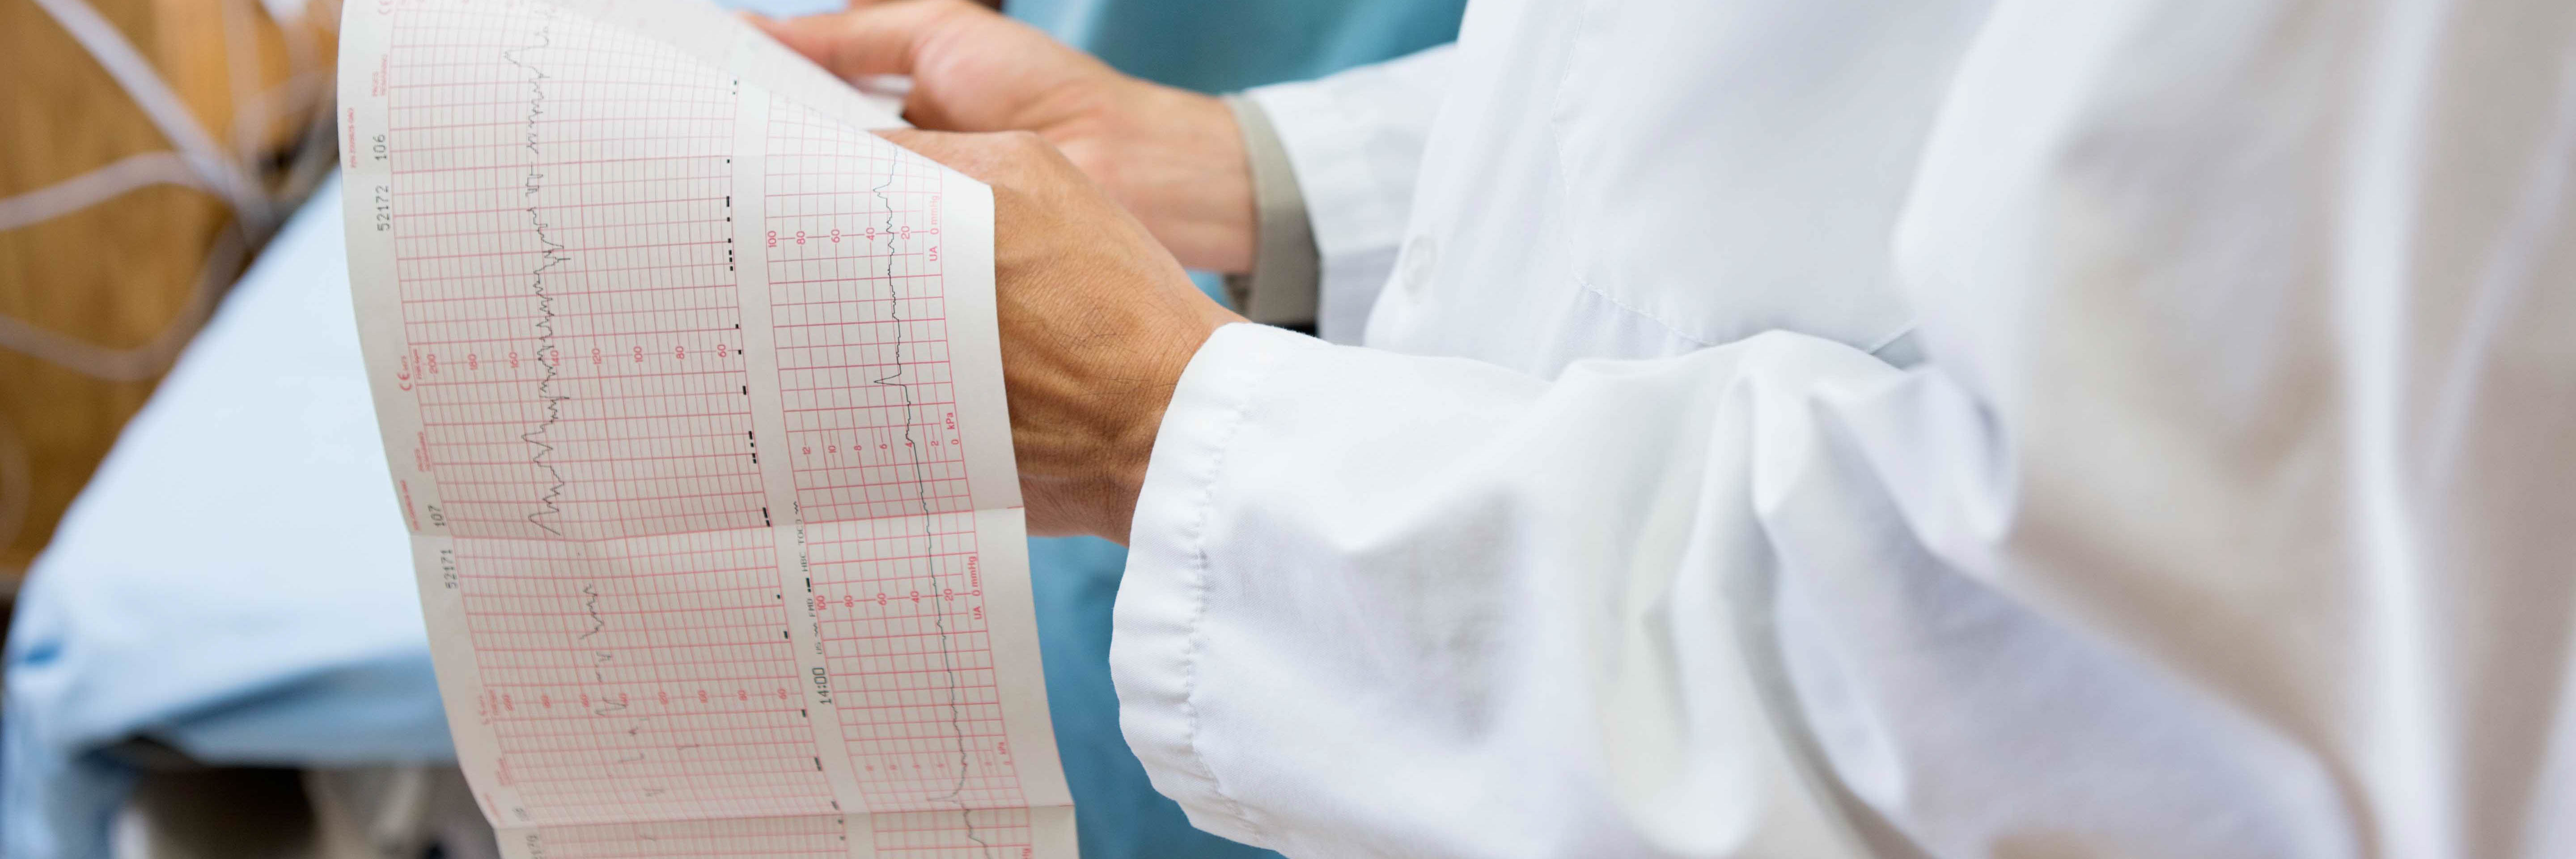 A healthcare provider holding a medical chart.